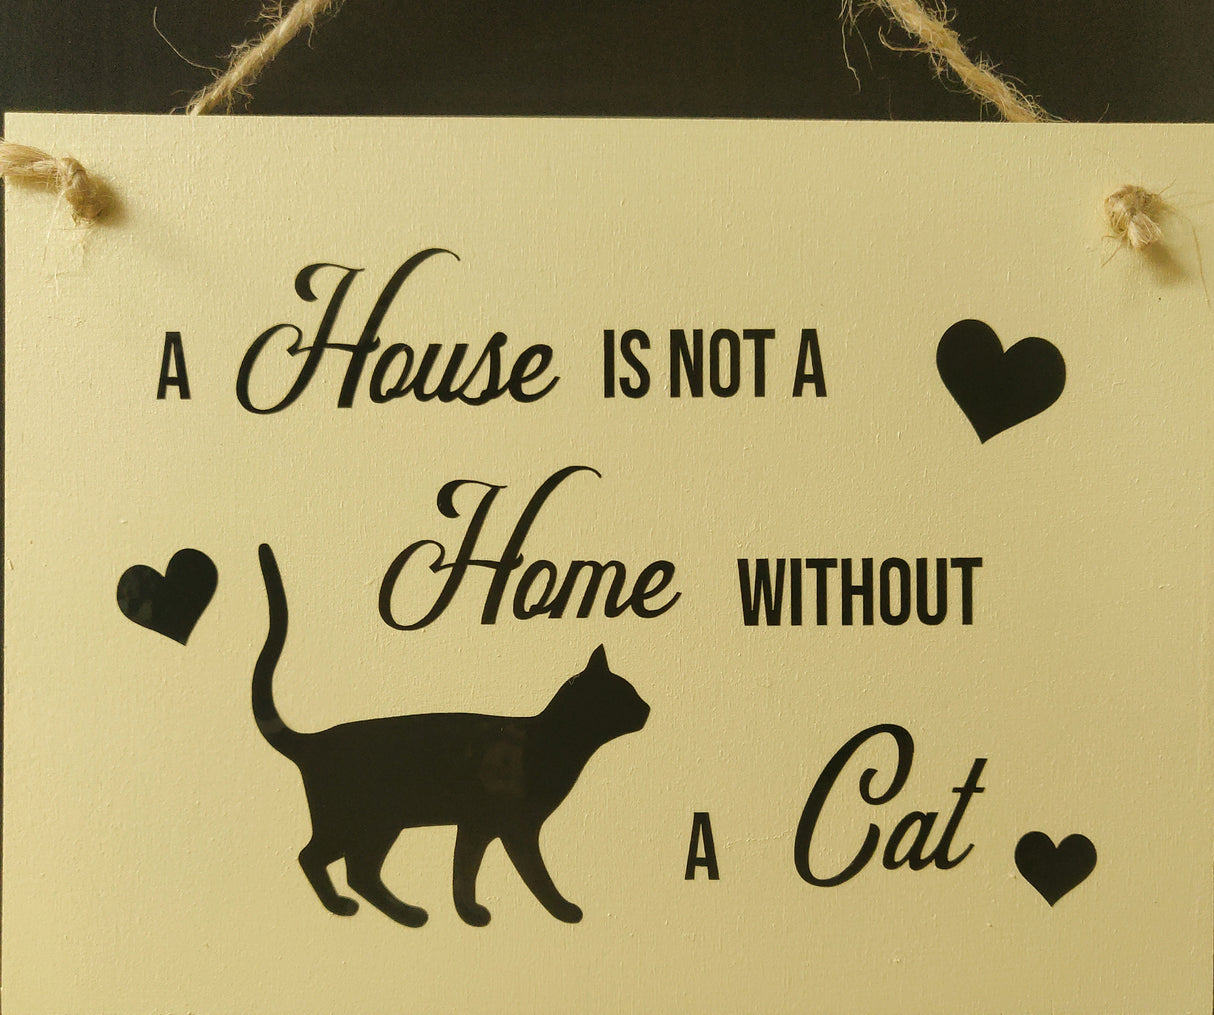 House without a cat